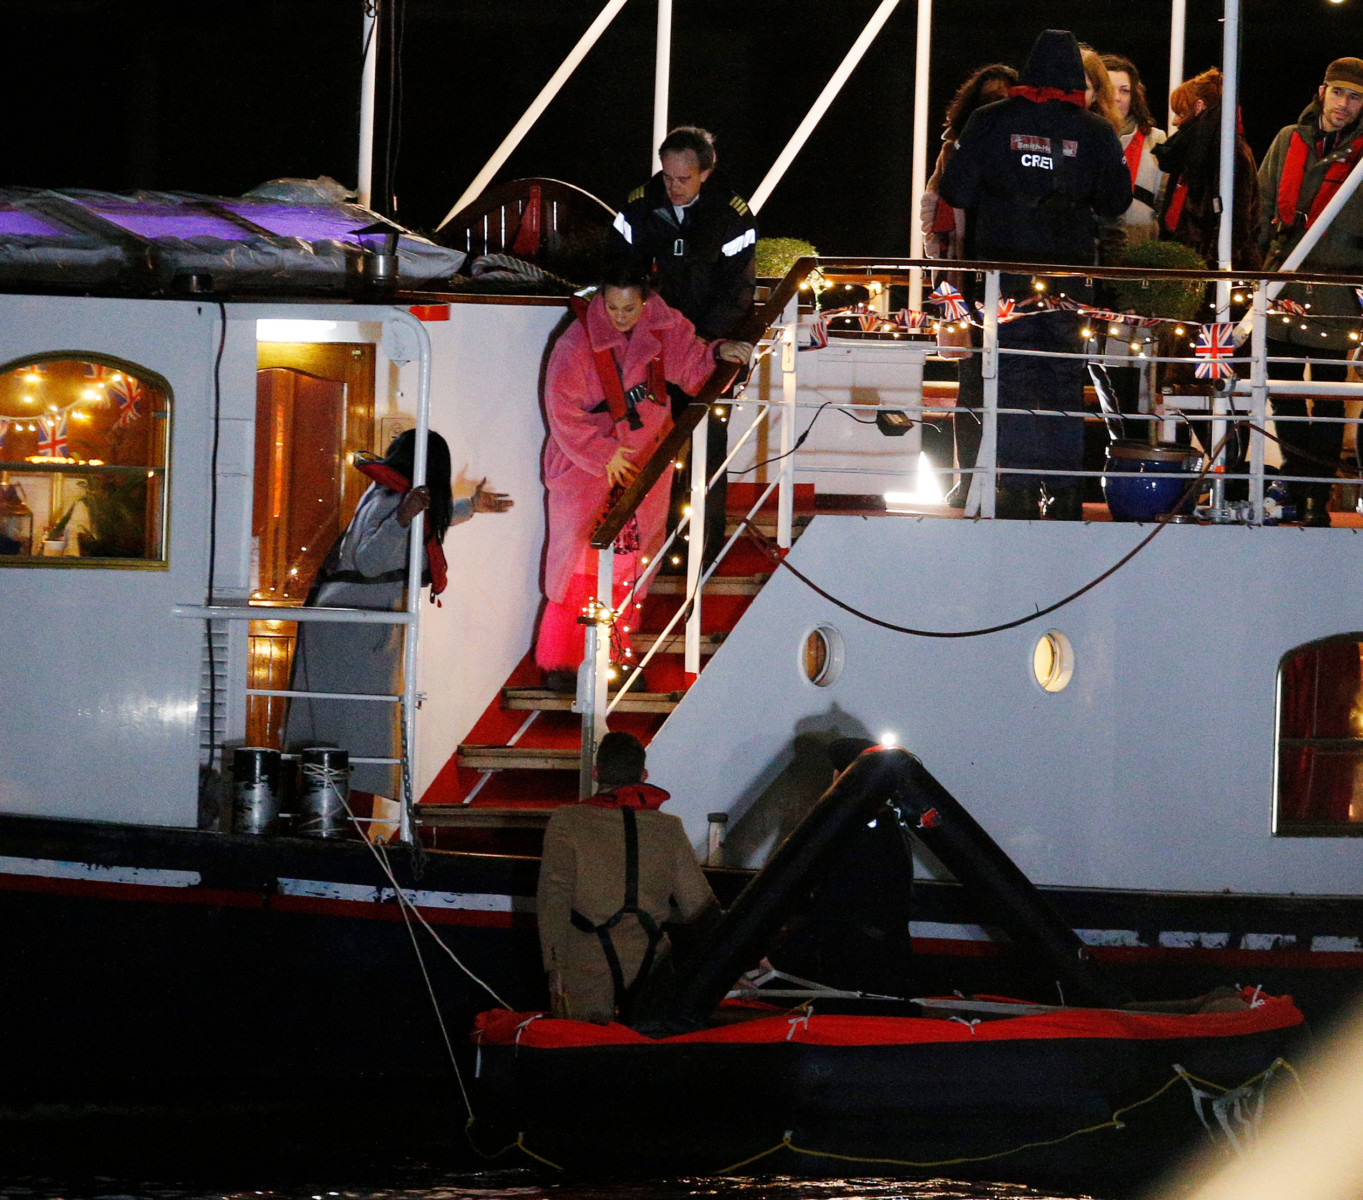 The EastEnders clip shows cast members leaving the sinking riverboat to get on life rafts